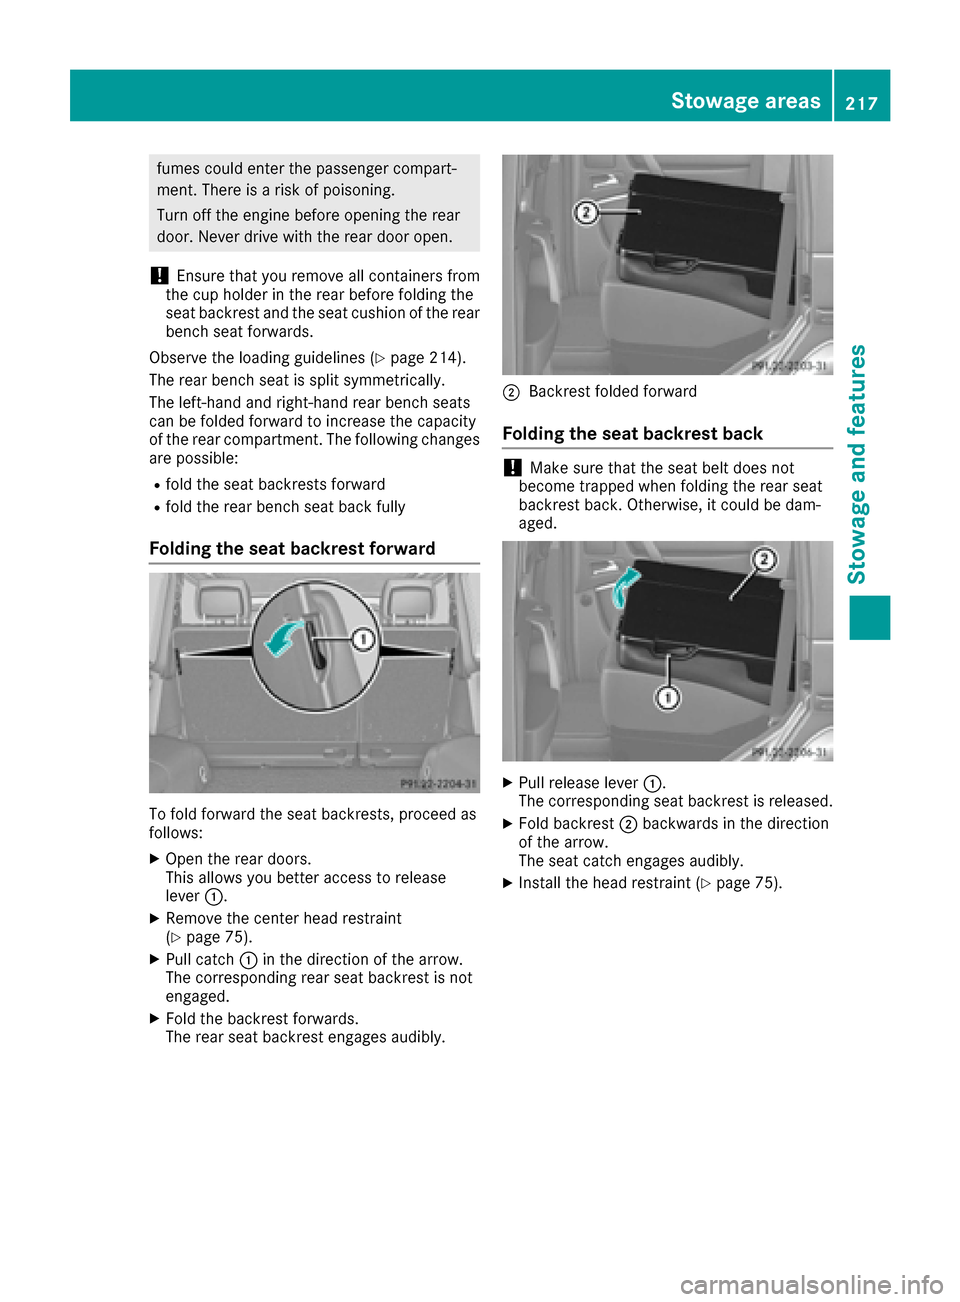 MERCEDES-BENZ G-Class 2016 W463 Owners Manual fumes could enter the passenger compart-
ment. There is a risk of poisoning.
Turn off the engine before opening the rear
door. Never drive with the rear door open.
!Ensure that you remove all containe